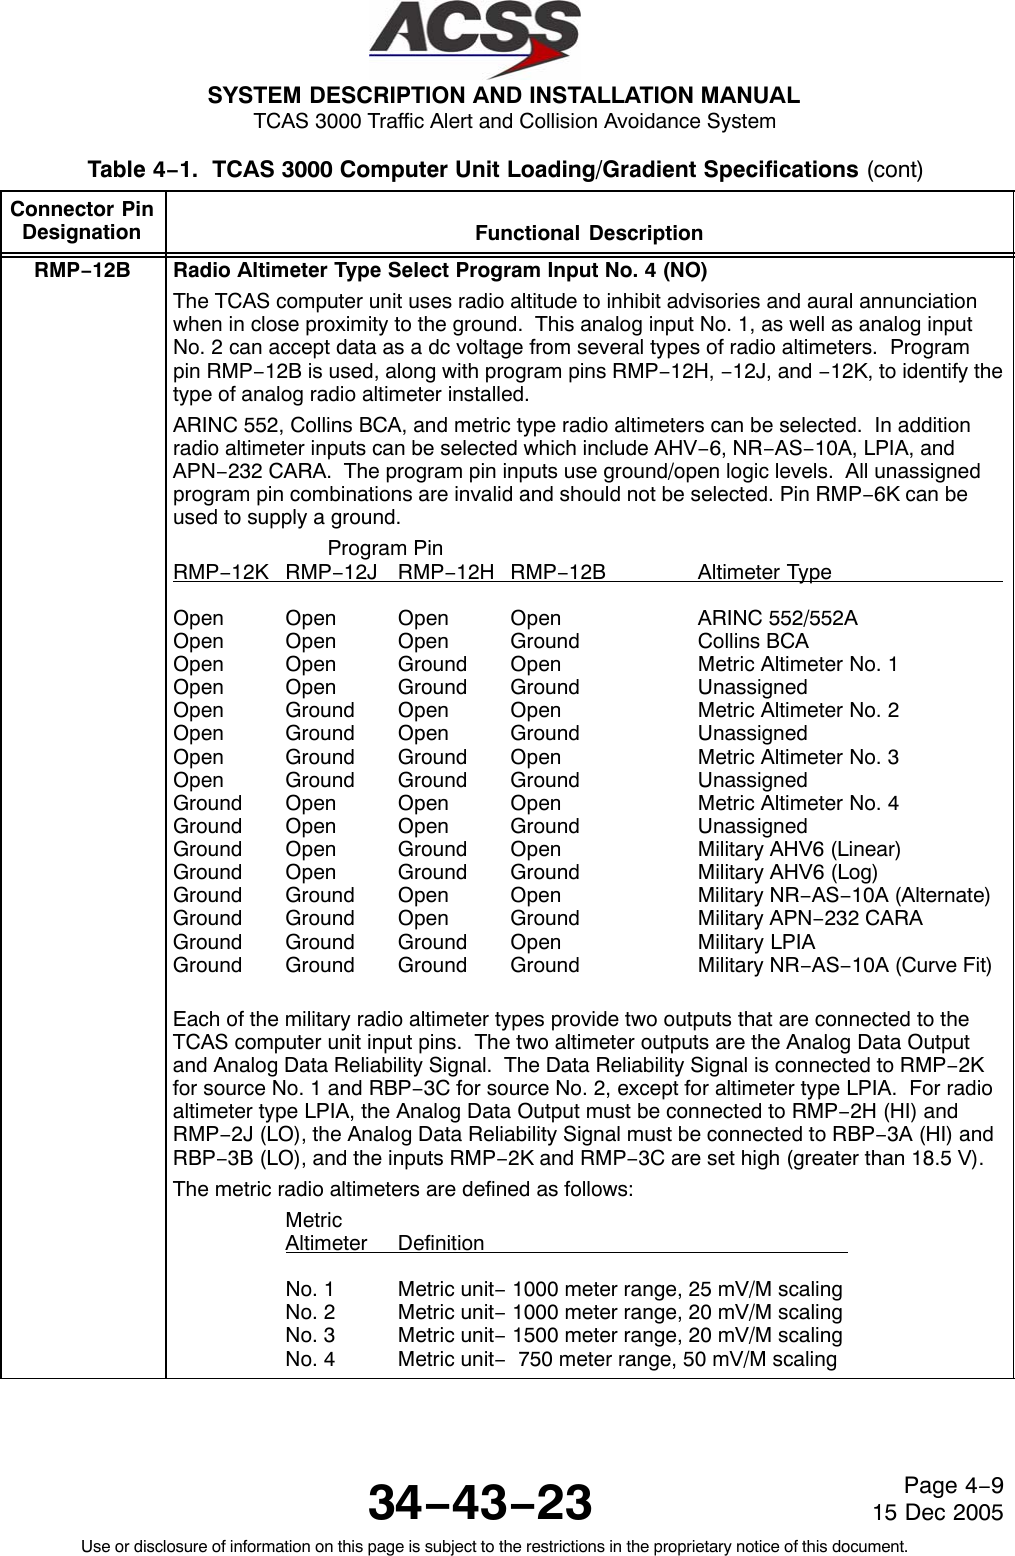 SYSTEM DESCRIPTION AND INSTALLATION MANUAL TCAS 3000 Traffic Alert and Collision Avoidance System34−43−23Use or disclosure of information on this page is subject to the restrictions in the proprietary notice of this document.Page 4−915 Dec 2005Table 4−1.  TCAS 3000 Computer Unit Loading/Gradient Specifications (cont)Connector PinDesignation Functional DescriptionRMP−12B Radio Altimeter Type Select Program Input No. 4 (NO)The TCAS computer unit uses radio altitude to inhibit advisories and aural annunciationwhen in close proximity to the ground.  This analog input No. 1, as well as analog inputNo. 2 can accept data as a dc voltage from several types of radio altimeters.  Programpin RMP−12B is used, along with program pins RMP−12H, −12J, and −12K, to identify thetype of analog radio altimeter installed.ARINC 552, Collins BCA, and metric type radio altimeters can be selected.  In additionradio altimeter inputs can be selected which include AHV−6, NR−AS−10A, LPIA, andAPN−232 CARA.  The program pin inputs use ground/open logic levels.  All unassignedprogram pin combinations are invalid and should not be selected. Pin RMP−6K can beused to supply a ground.       Program PinRMP−12K RMP−12J RMP−12H RMP−12B Altimeter TypeOpen Open Open Open ARINC 552/552AOpen Open Open Ground Collins BCAOpen Open Ground Open Metric Altimeter No. 1Open Open Ground Ground UnassignedOpen Ground Open Open Metric Altimeter No. 2Open Ground Open Ground UnassignedOpen Ground Ground Open Metric Altimeter No. 3Open Ground Ground Ground UnassignedGround Open Open Open Metric Altimeter No. 4Ground Open Open Ground UnassignedGround Open Ground Open Military AHV6 (Linear)Ground Open Ground Ground Military AHV6 (Log)Ground Ground Open Open Military NR−AS−10A (Alternate)Ground Ground Open Ground Military APN−232 CARAGround Ground Ground Open Military LPIAGround Ground Ground Ground Military NR−AS−10A (Curve Fit)Each of the military radio altimeter types provide two outputs that are connected to theTCAS computer unit input pins.  The two altimeter outputs are the Analog Data Outputand Analog Data Reliability Signal.  The Data Reliability Signal is connected to RMP−2Kfor source No. 1 and RBP−3C for source No. 2, except for altimeter type LPIA.  For radioaltimeter type LPIA, the Analog Data Output must be connected to RMP−2H (HI) andRMP−2J (LO), the Analog Data Reliability Signal must be connected to RBP−3A (HI) andRBP−3B (LO), and the inputs RMP−2K and RMP−3C are set high (greater than 18.5 V).The metric radio altimeters are defined as follows:MetricAltimeter Definition                          No. 1 Metric unit− 1000 meter range, 25 mV/M scalingNo. 2 Metric unit− 1000 meter range, 20 mV/M scalingNo. 3 Metric unit− 1500 meter range, 20 mV/M scalingNo. 4 Metric unit−  750 meter range, 50 mV/M scaling